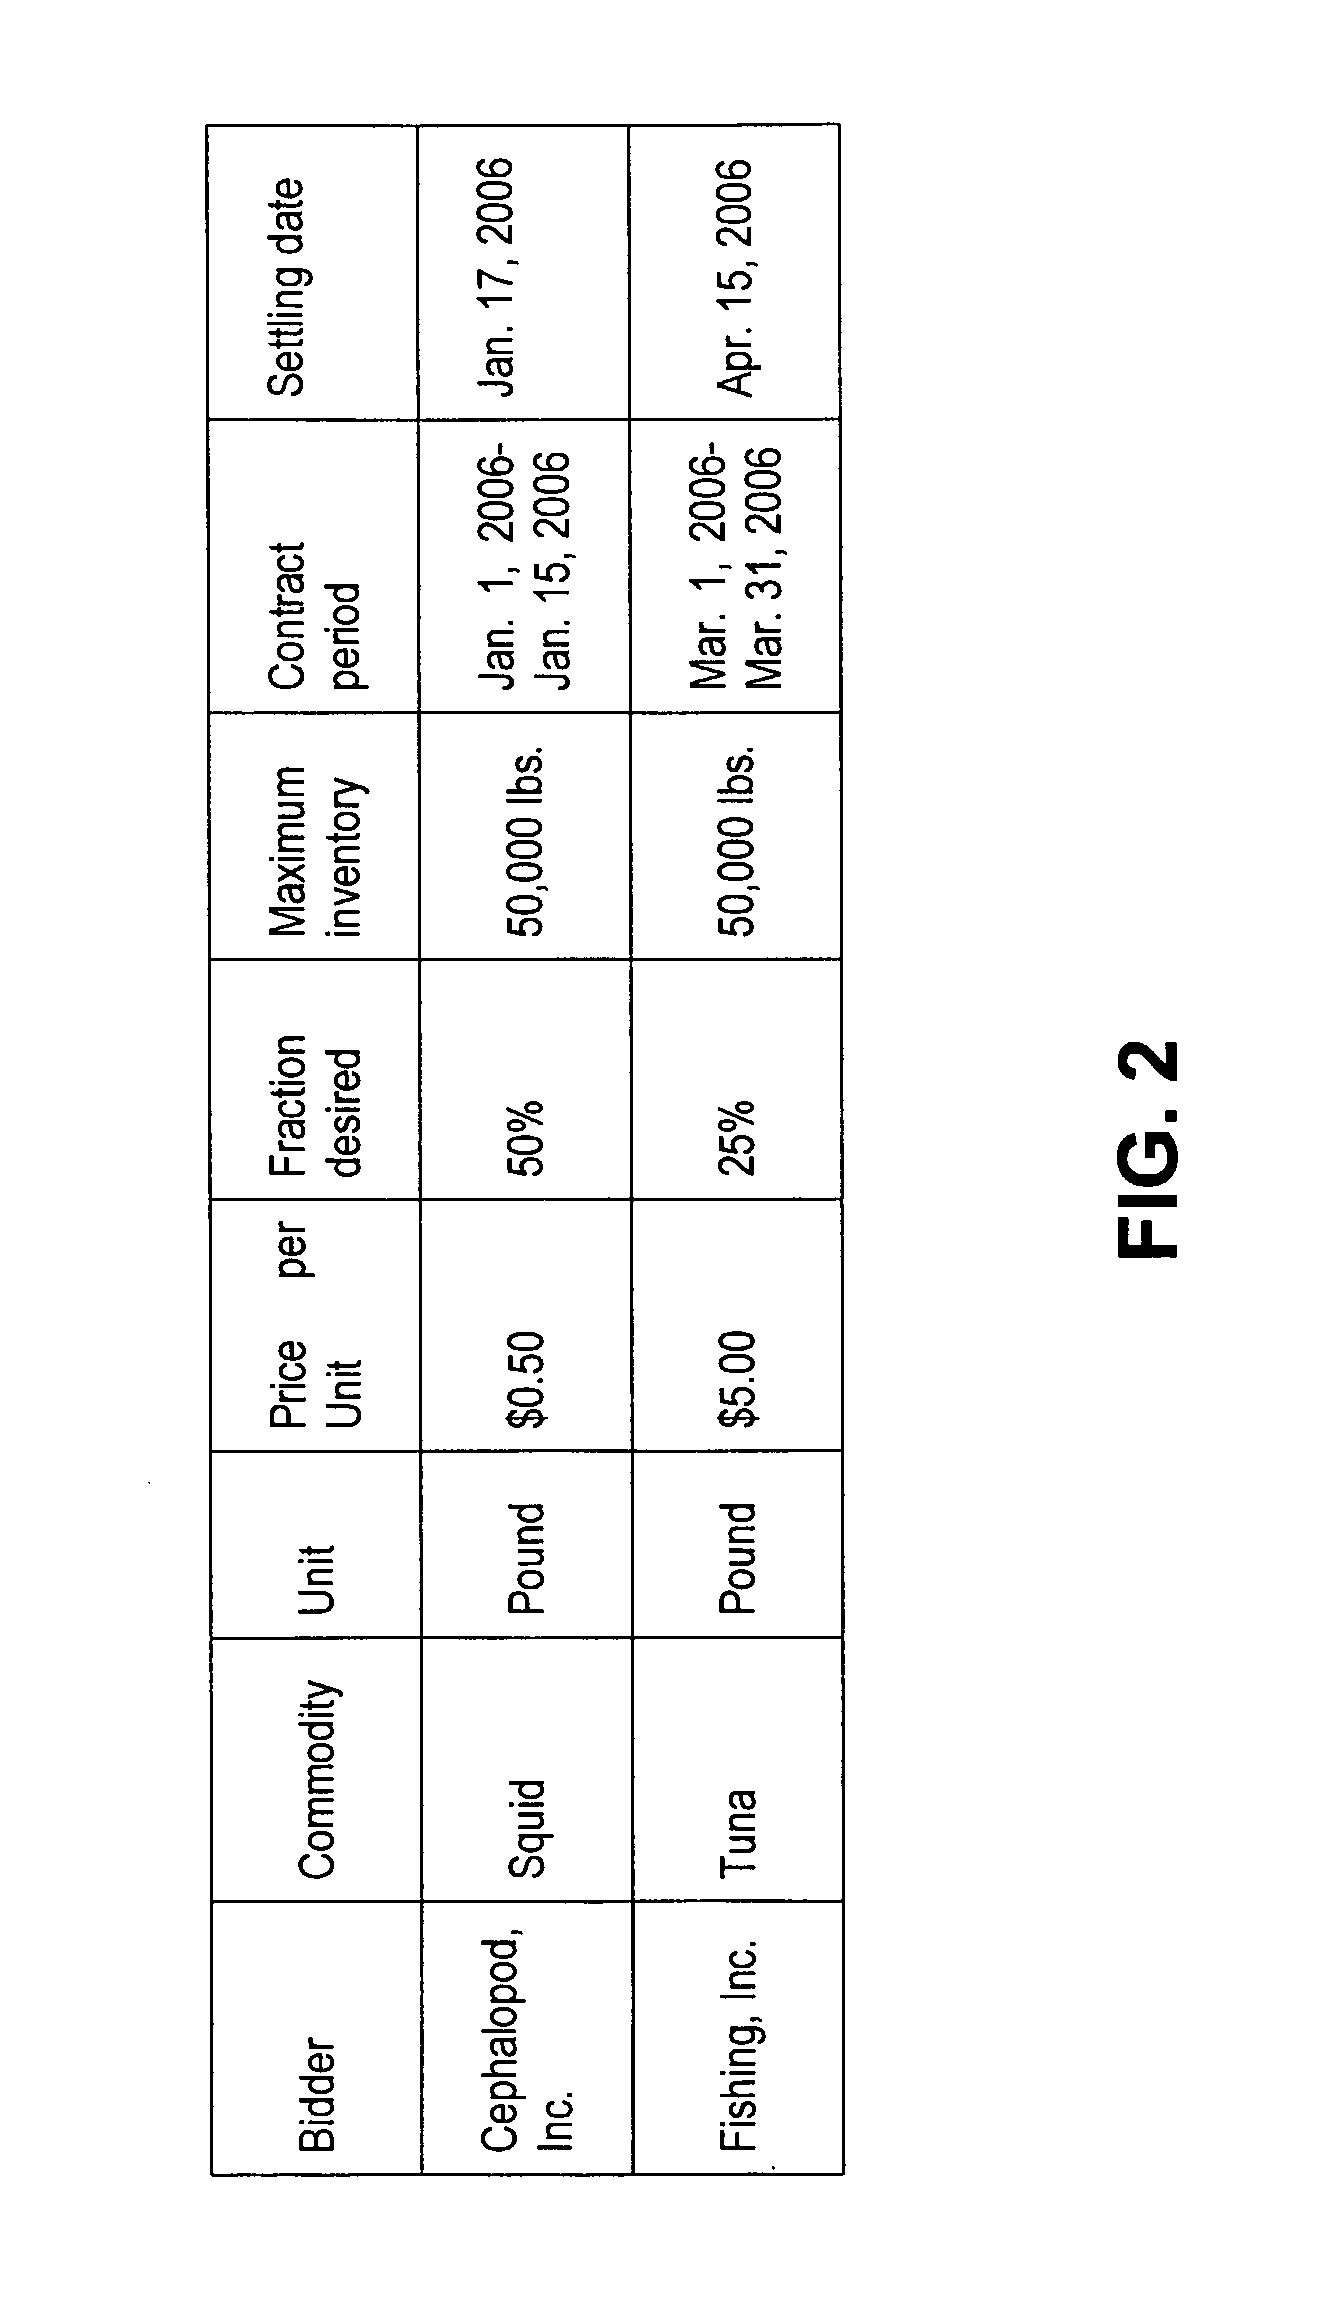 Method for Managing Markets for Commodities Using Fractional Forward Derivative